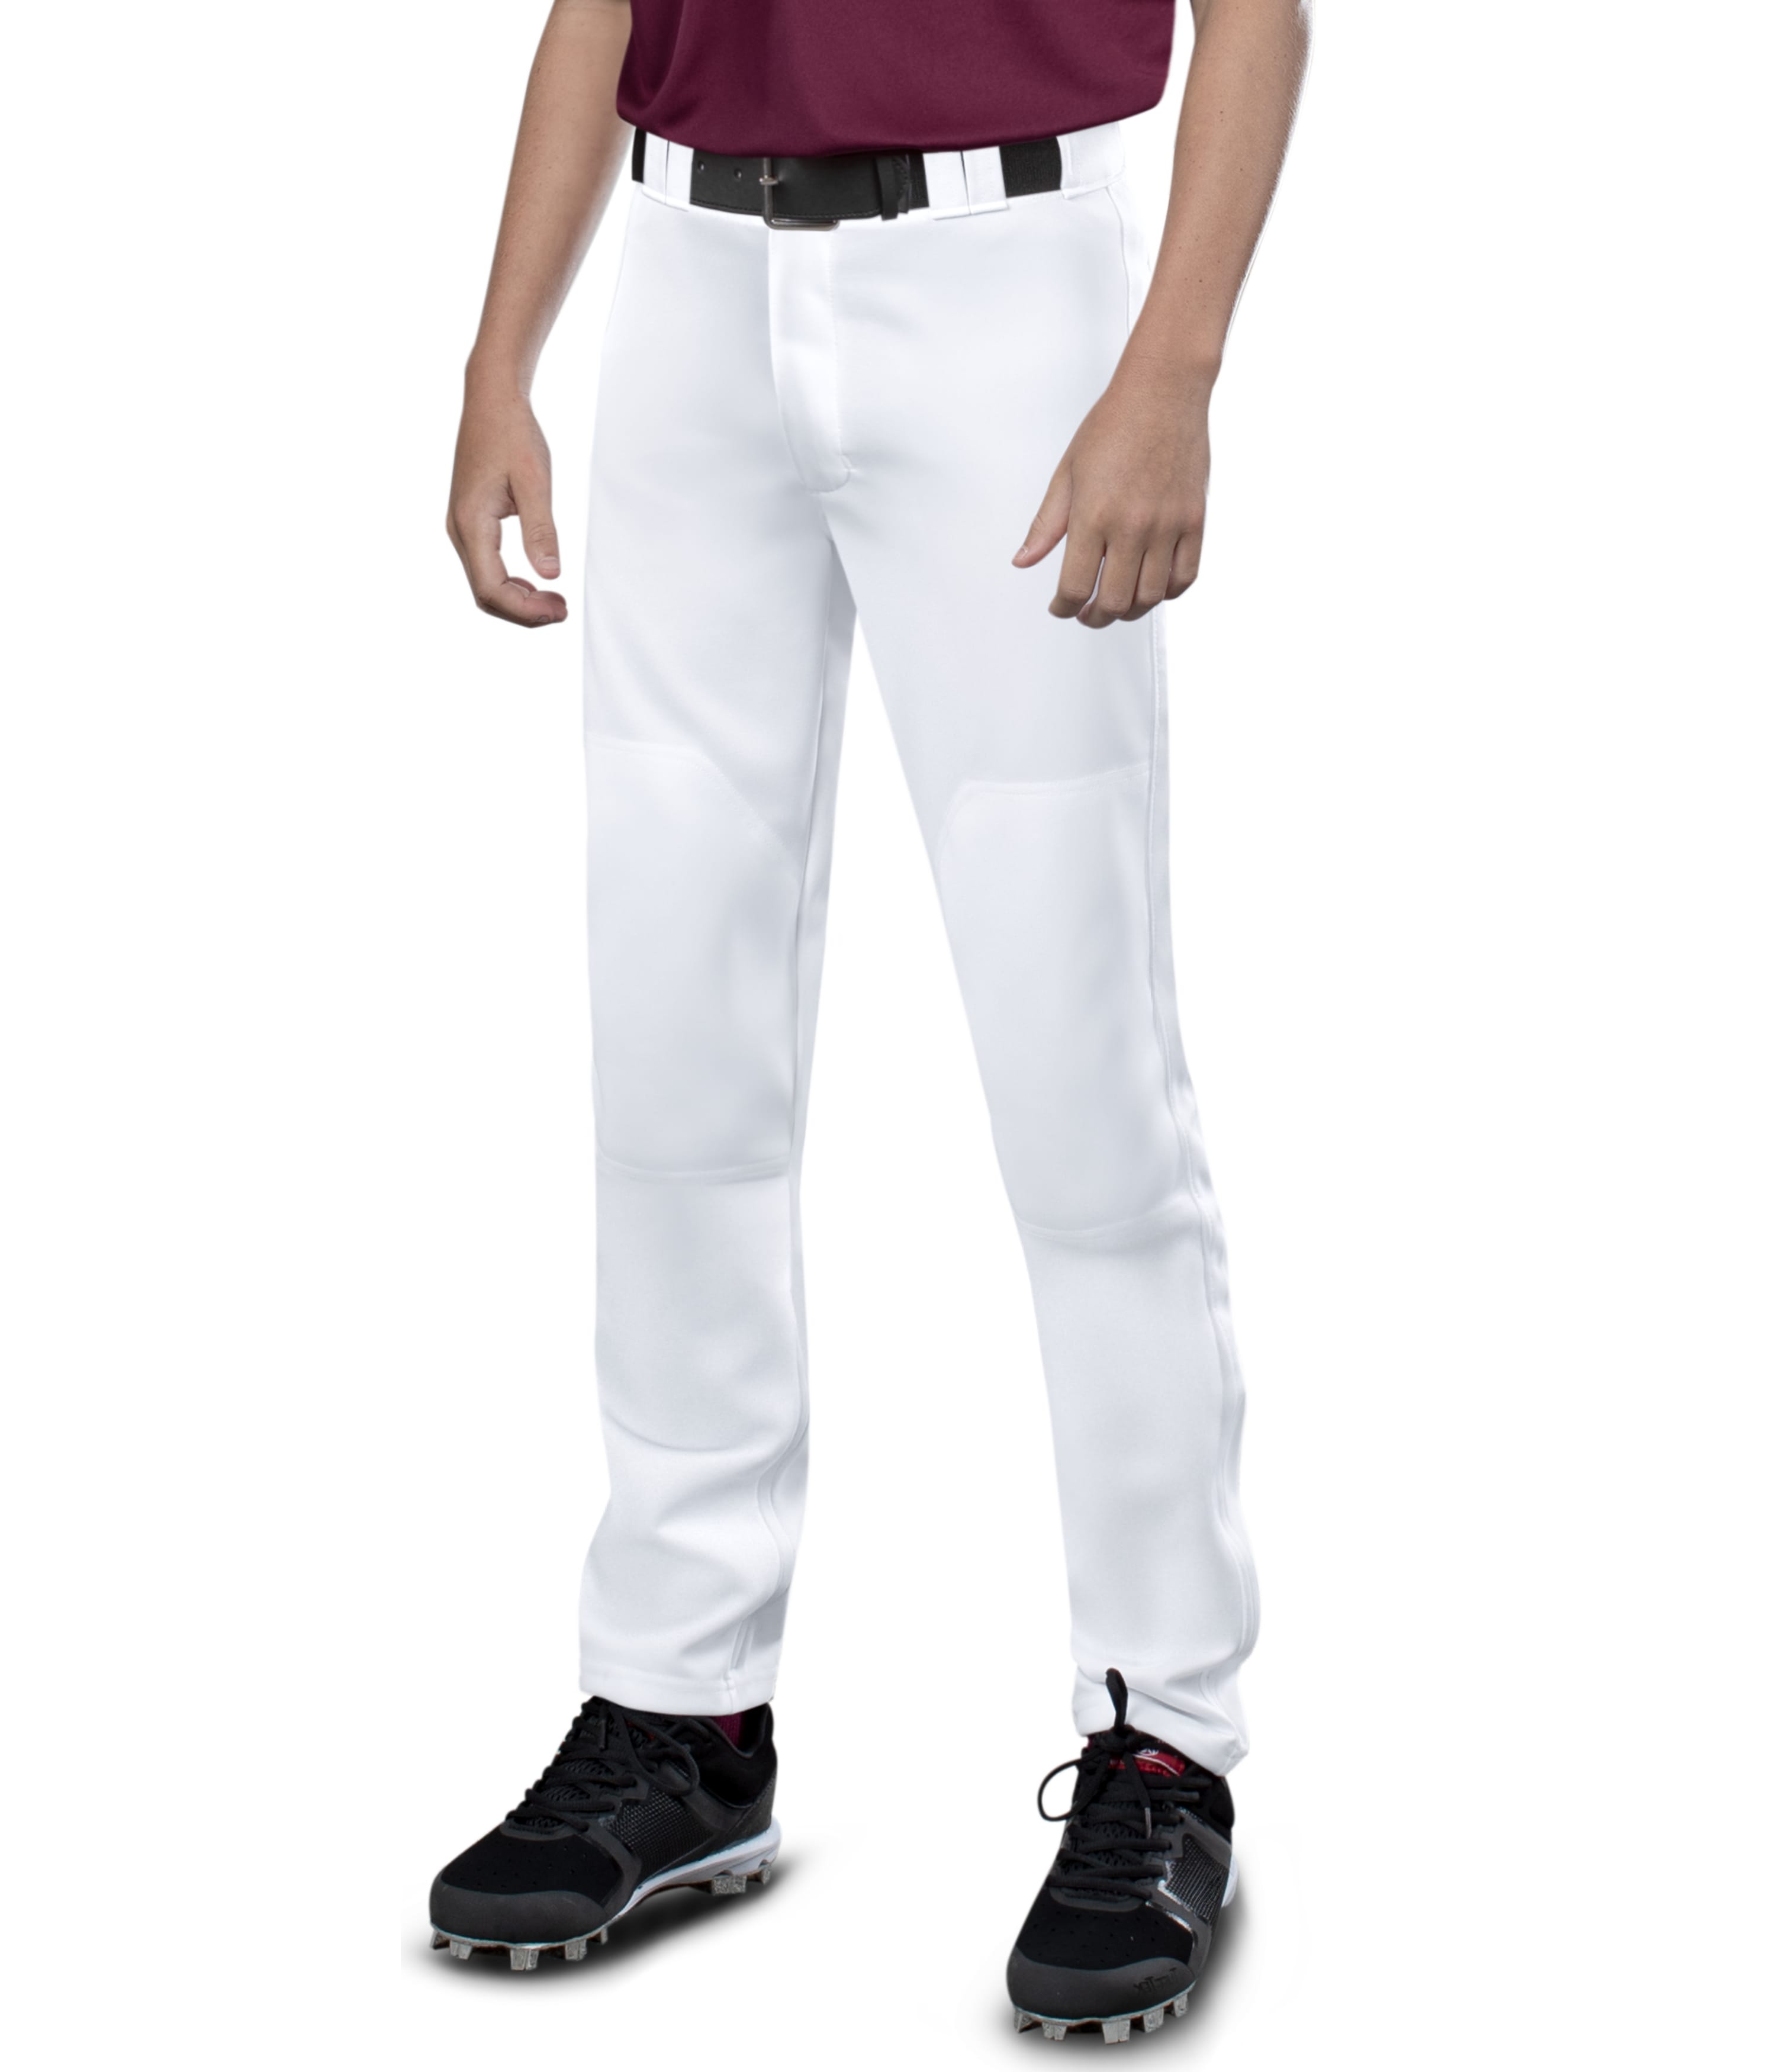 Youth Piped Change Up Baseball Pant